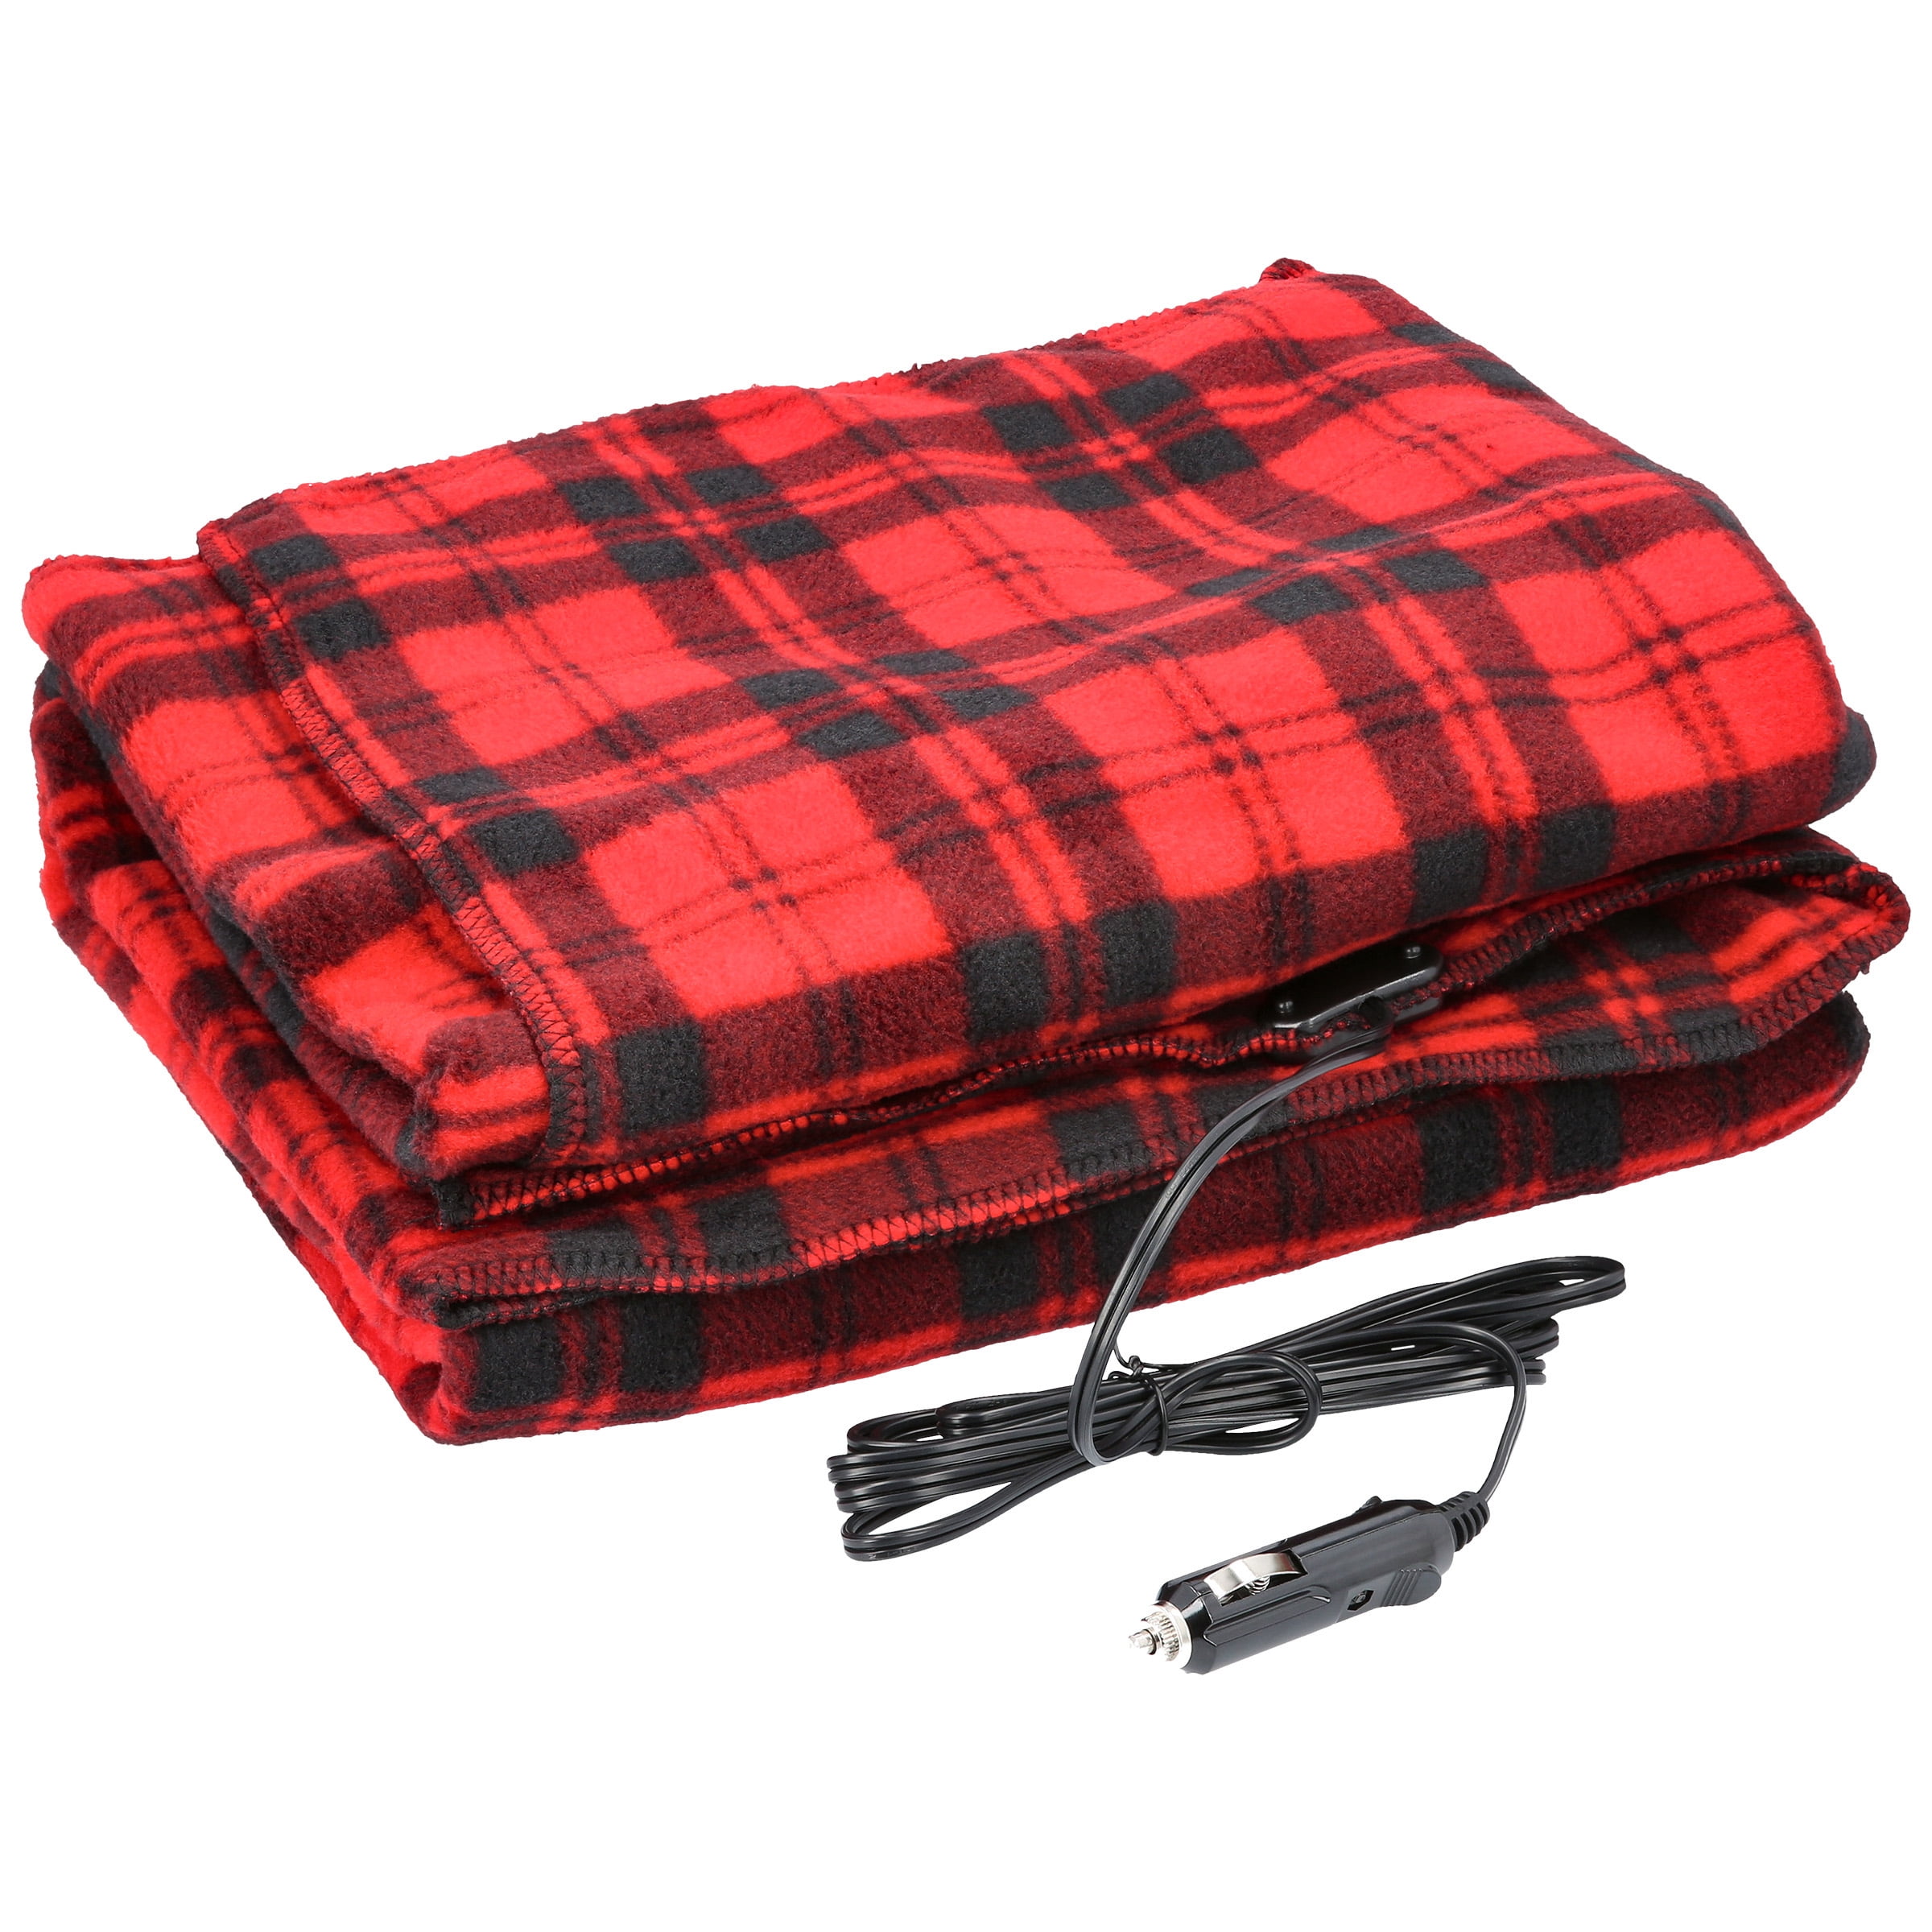 150 70cm hinffinity Electric Blanket 12V/24V Car Heated Throw 50W Waterproof heating pad Heating Quilt Cushion Emergency Kits for Cold Weather Travel Camping Picnic 